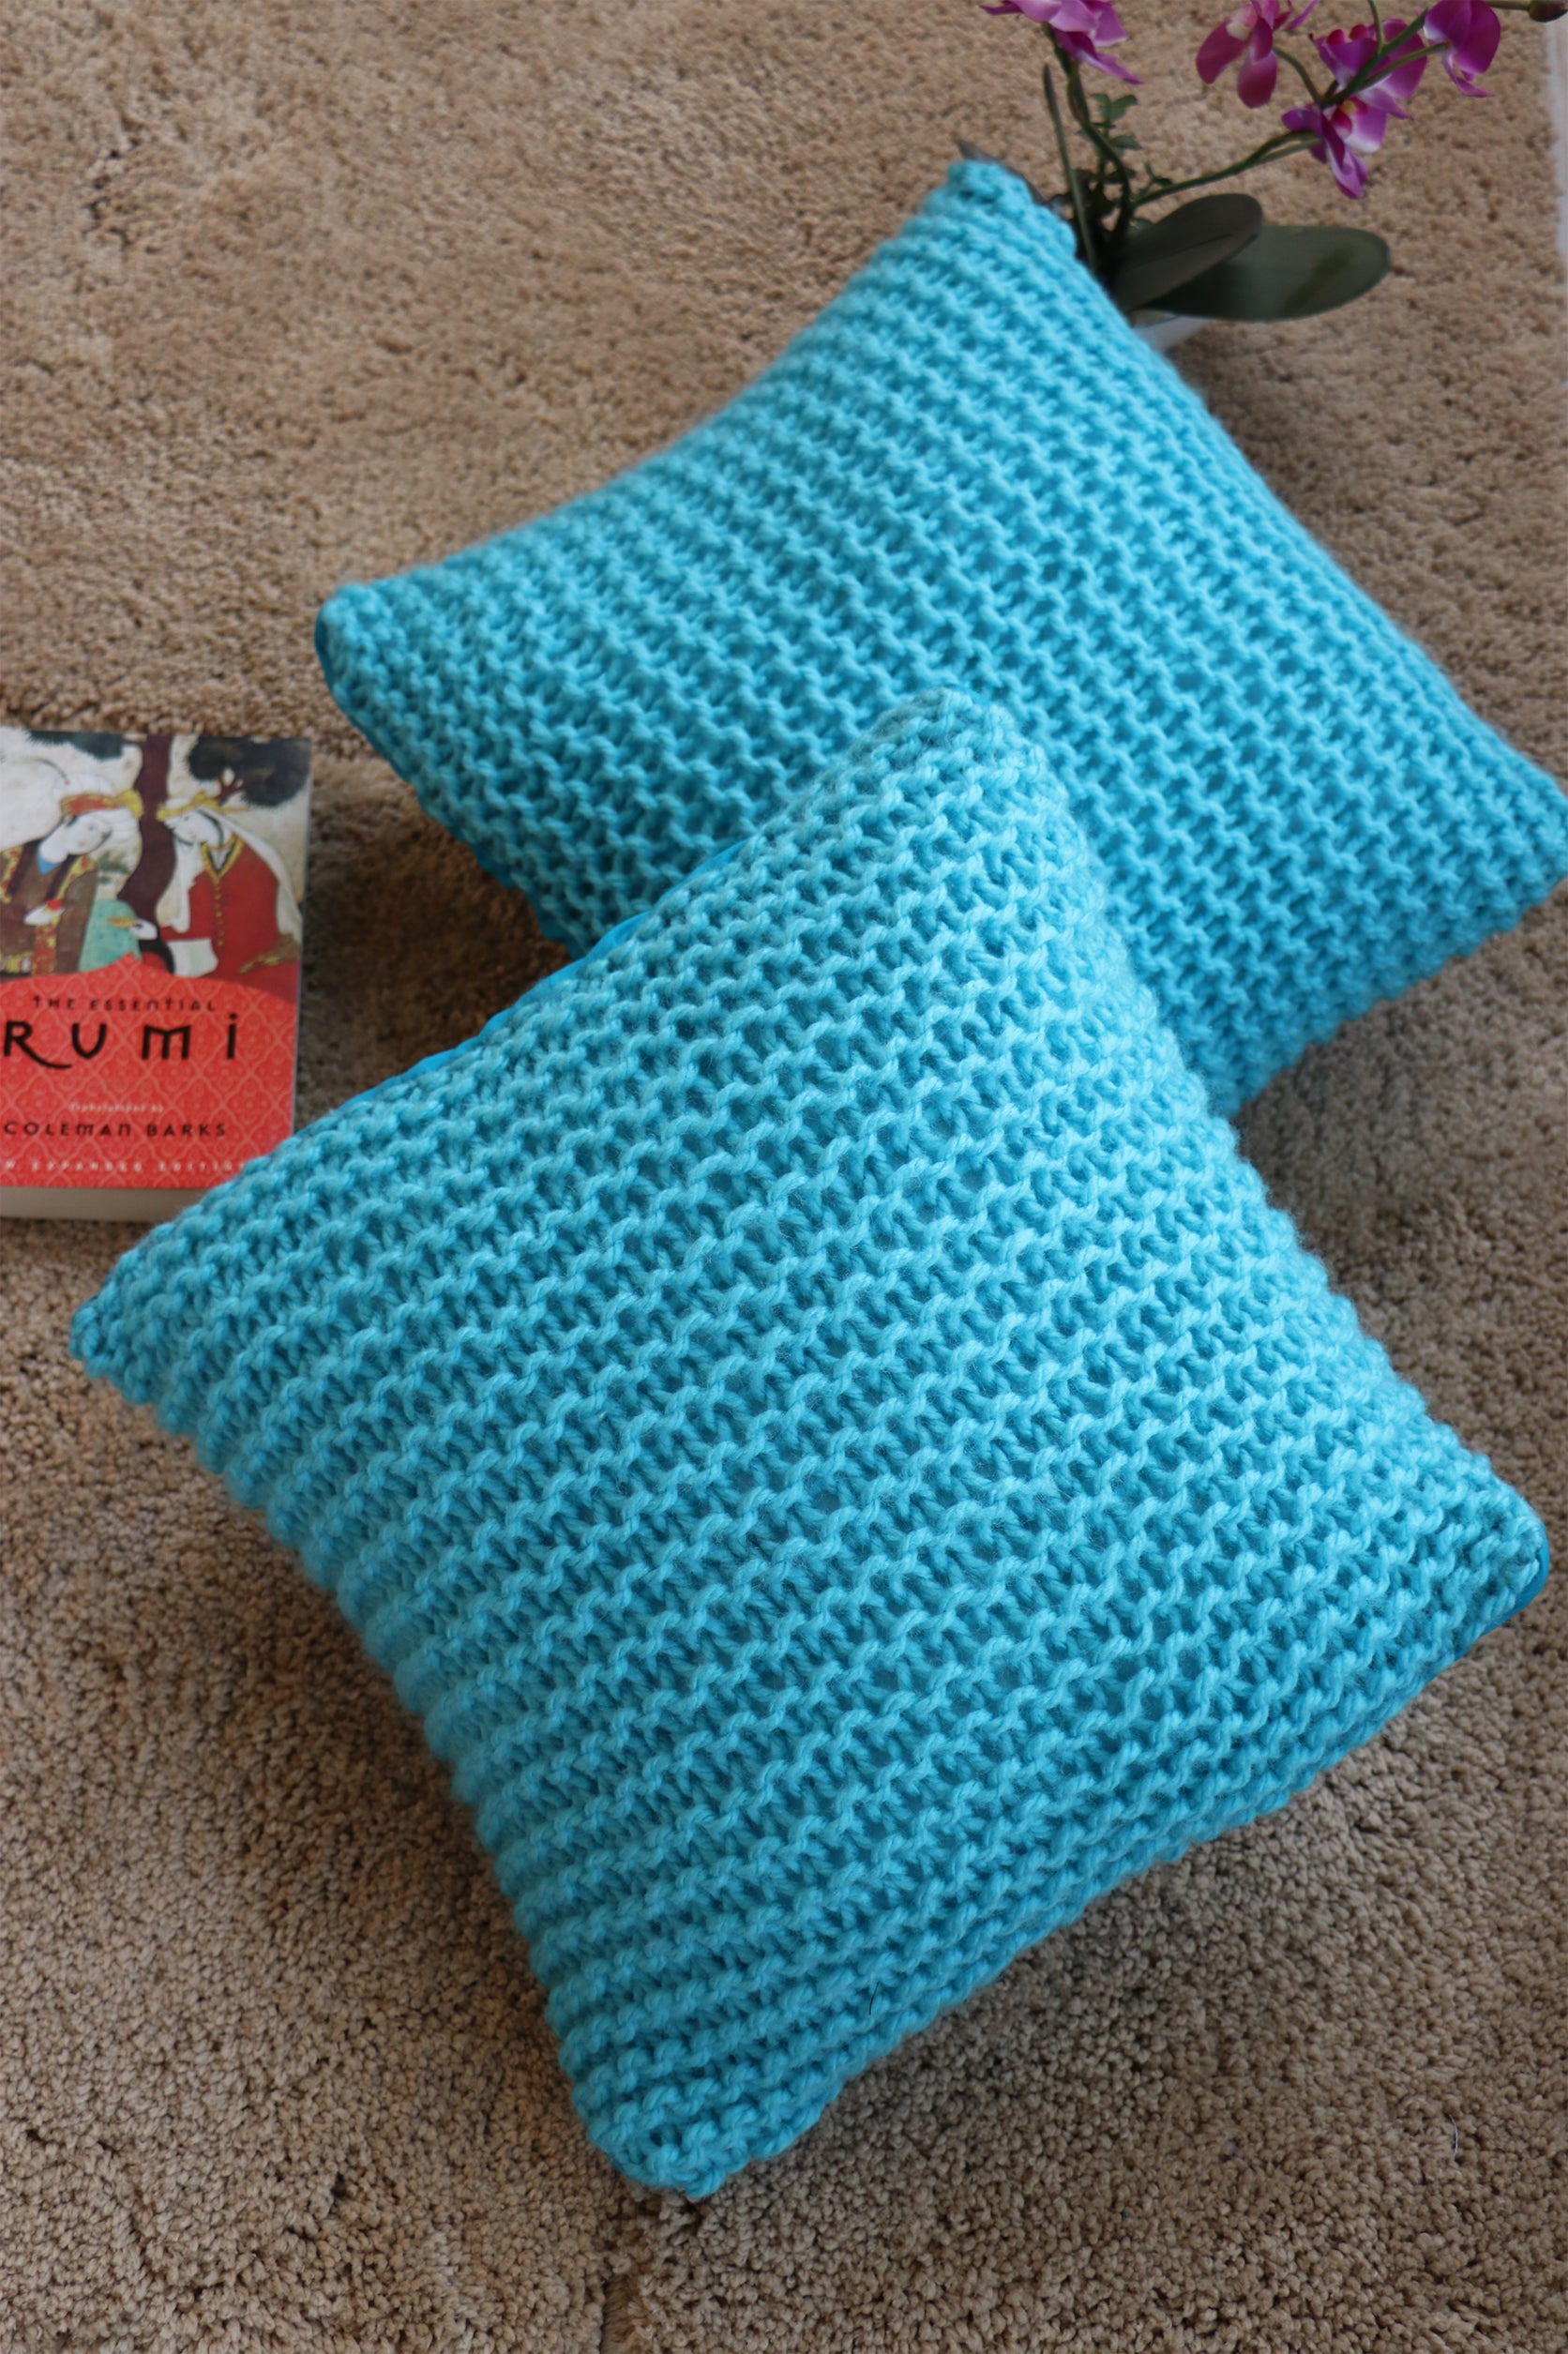 Blue hand knitted cushions by artisans of India for winter season